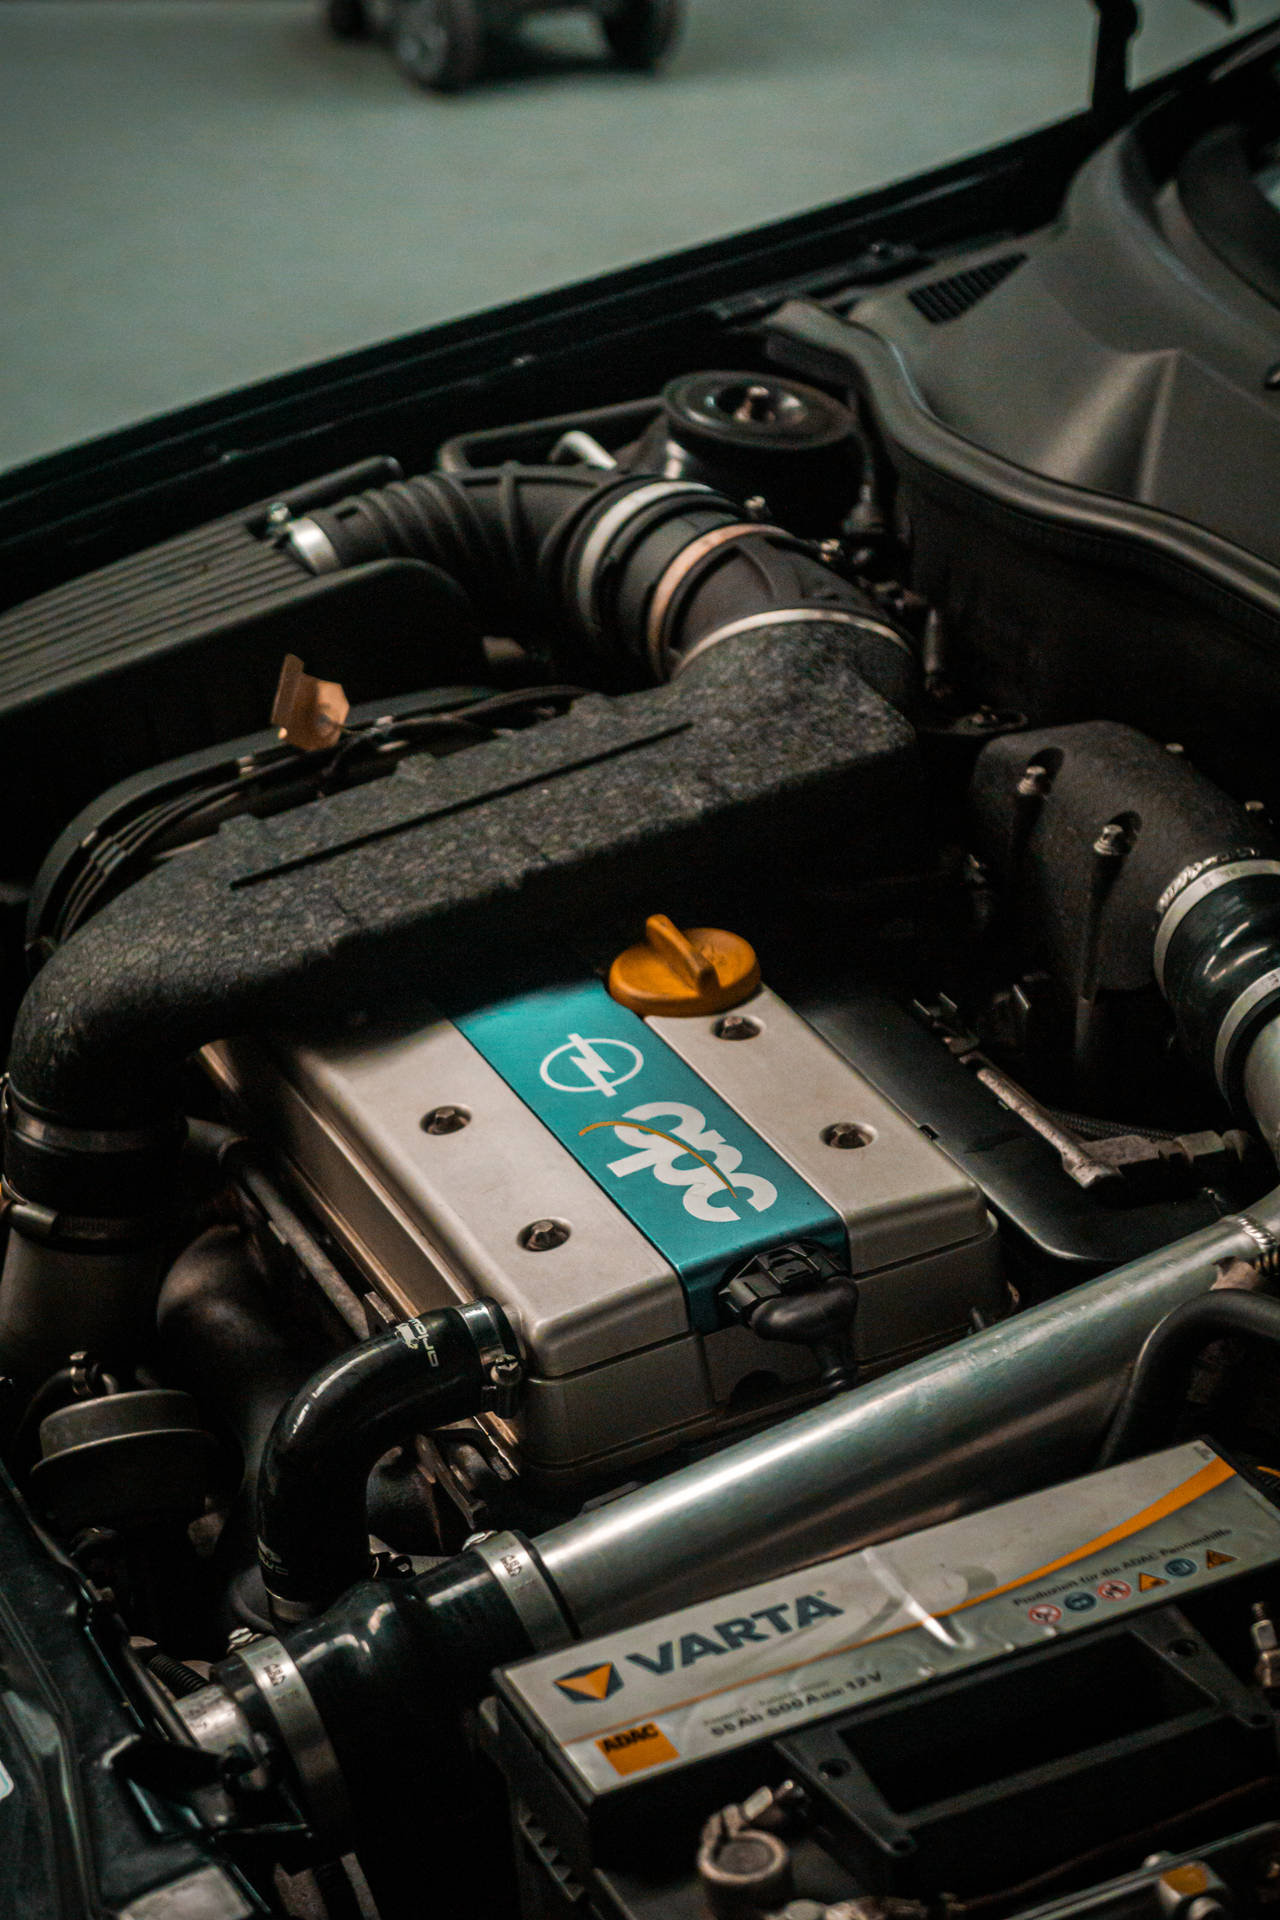 Power Up in Style with OPC Engine Wallpaper